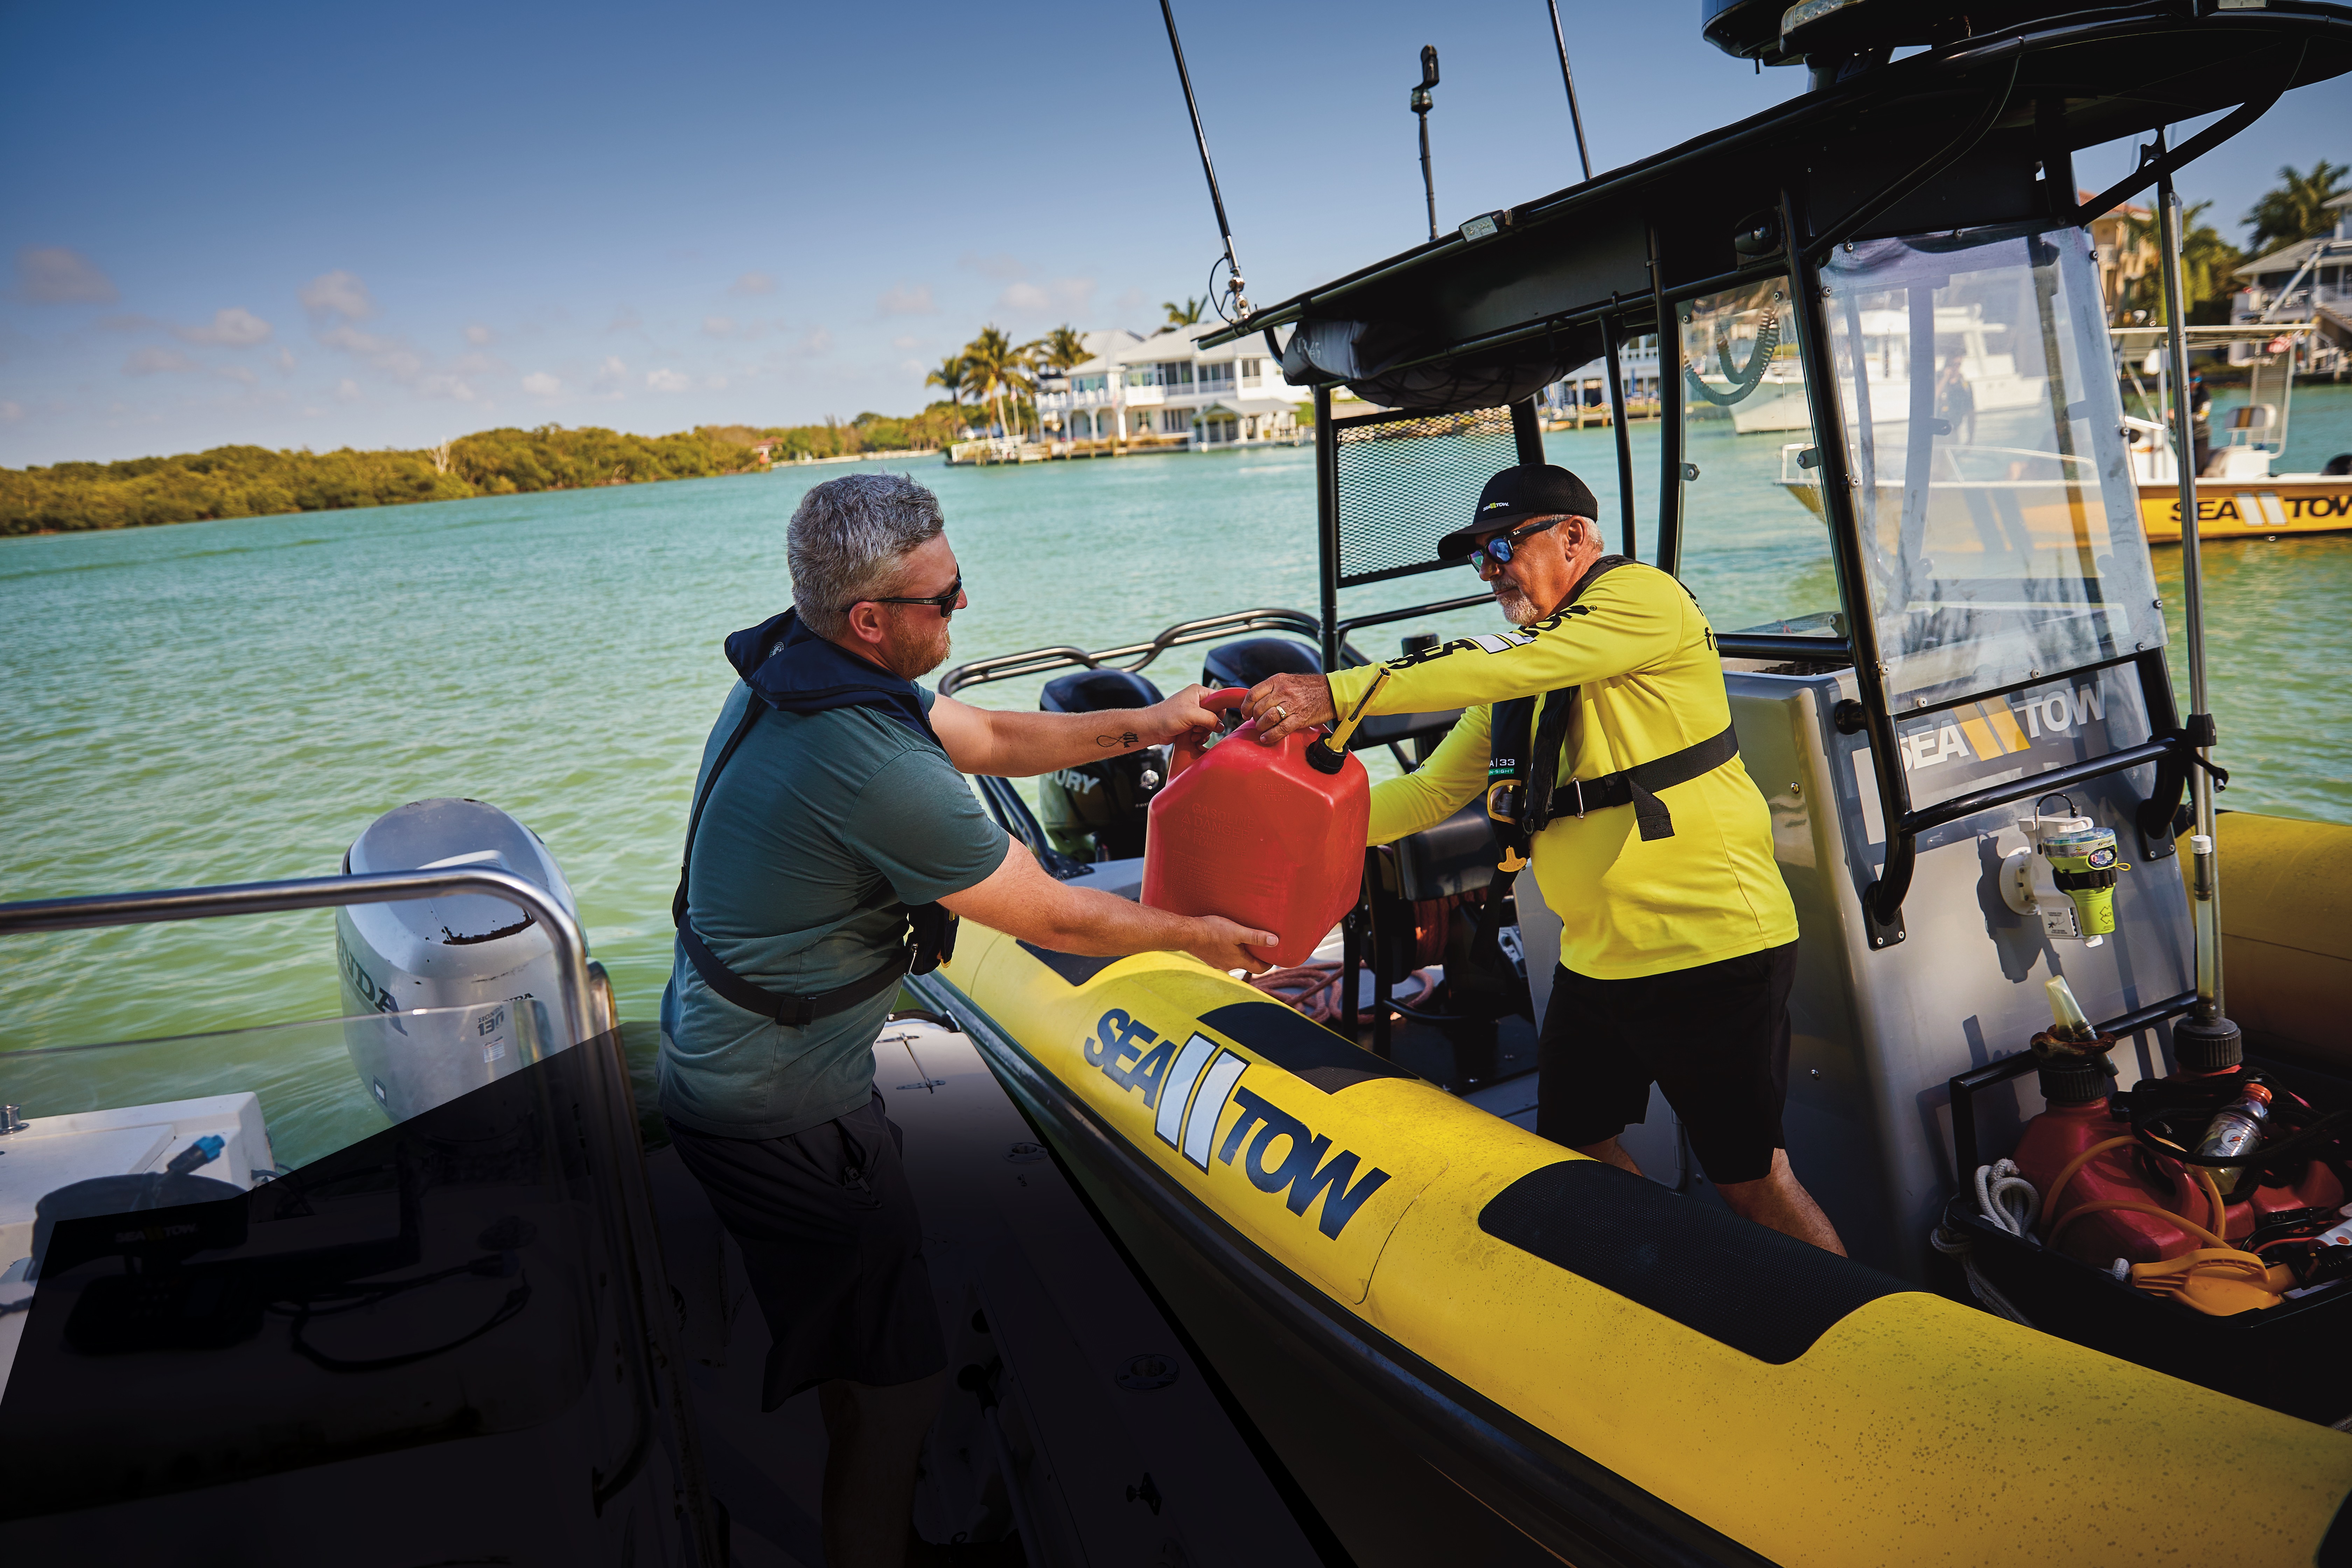 Sea Tow gas delivery, on-water services